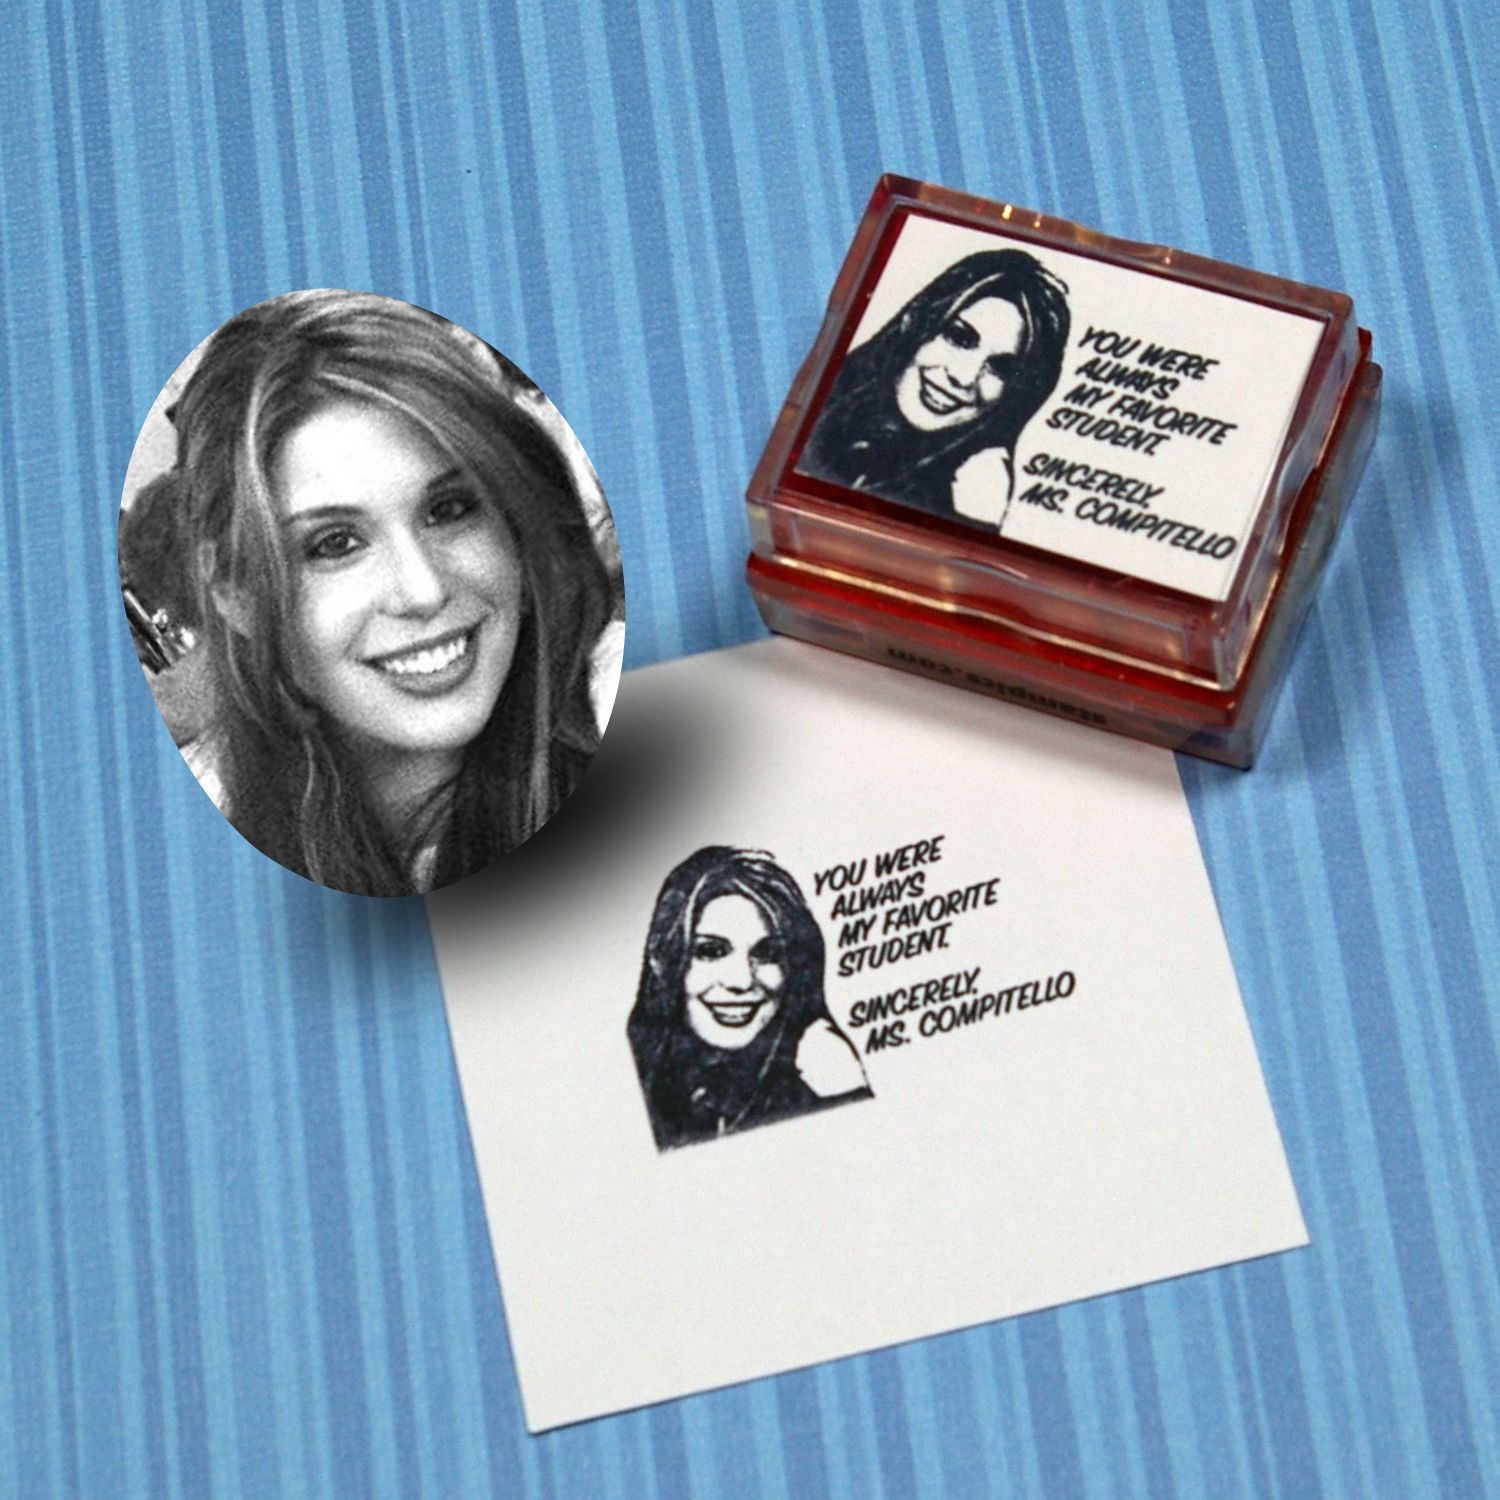 Teacher Rubber Stamps  Rubber Stamps Made from Your Photos!